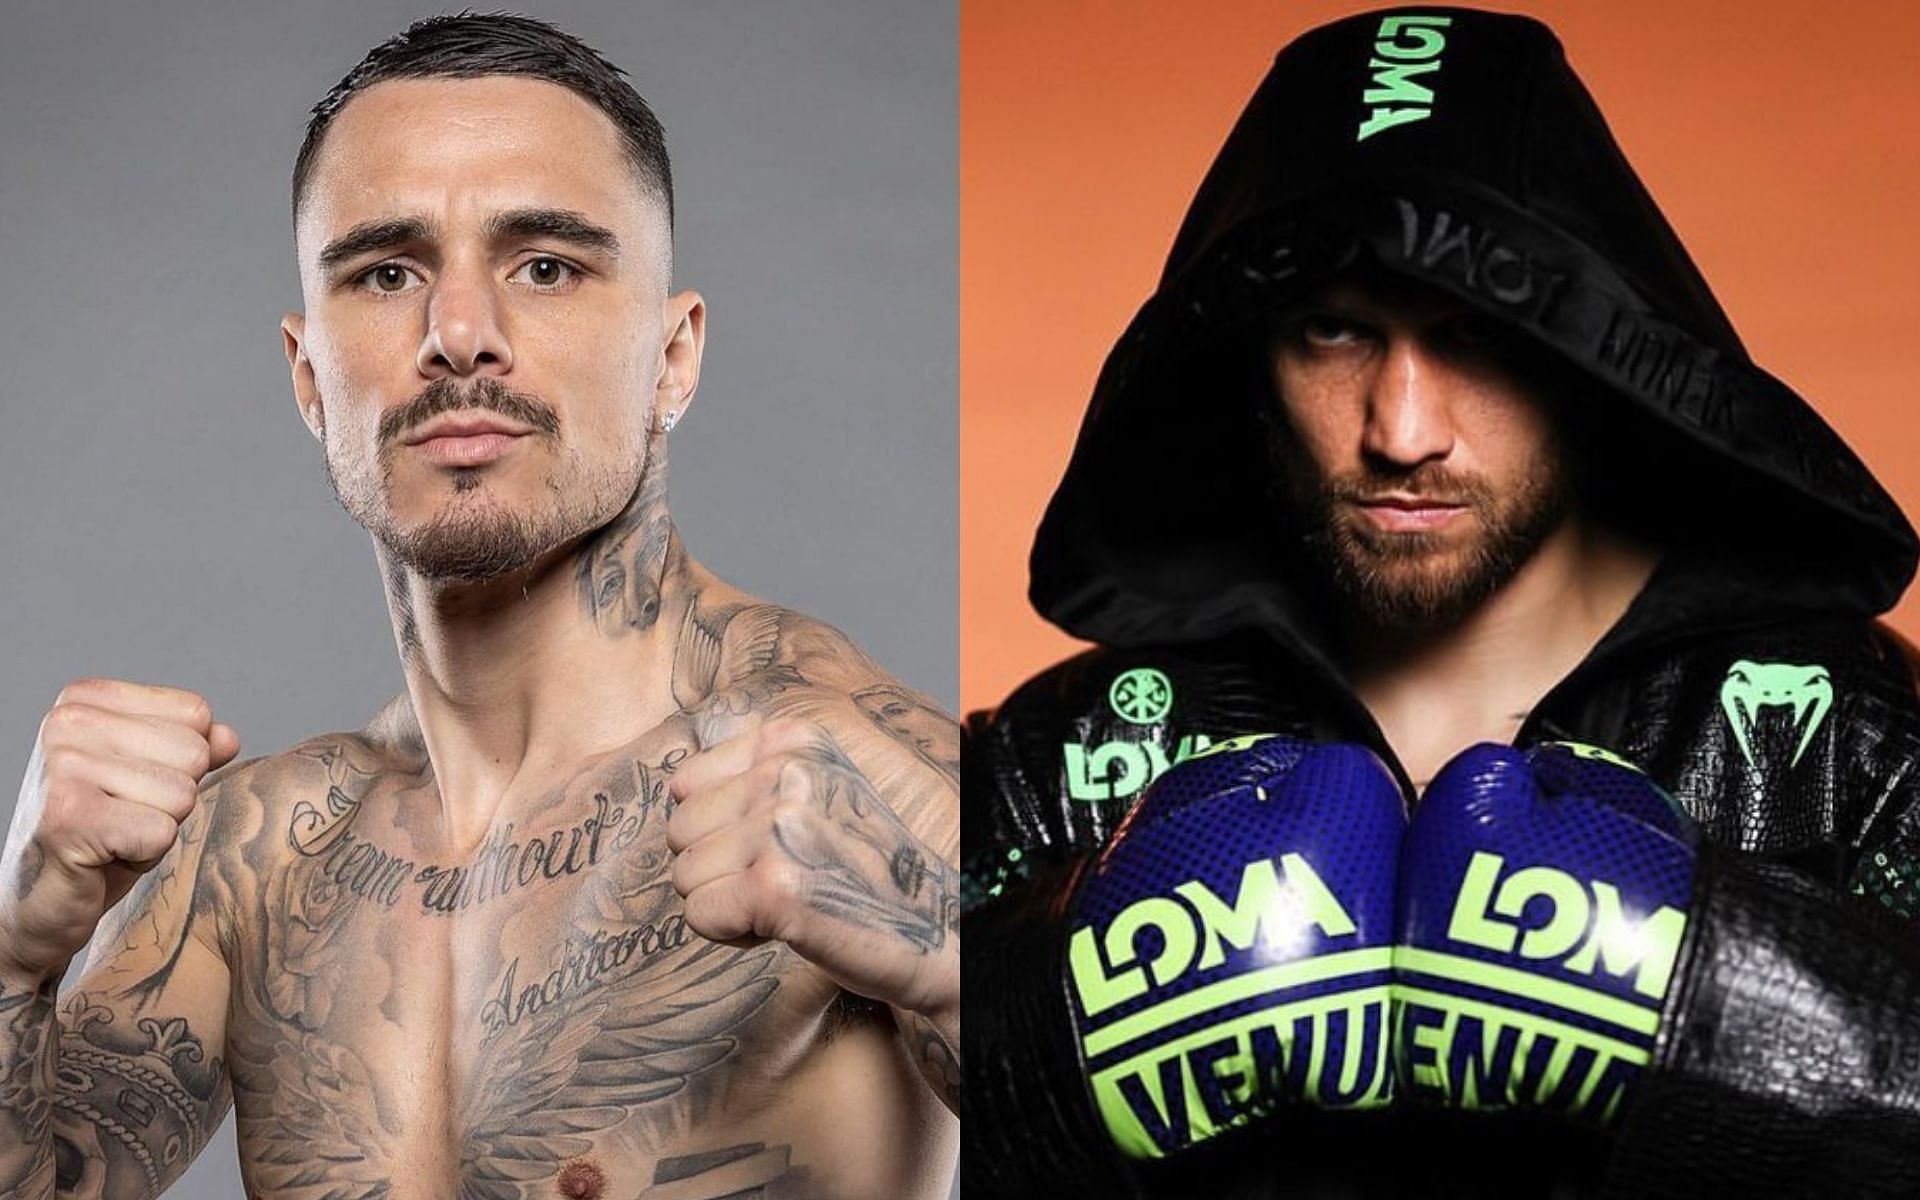 George Kambosos Jr. will take on Vasiliy Lomachenko at the RAC Arena in Perth [Images courtesy @georgekambososjr and @lomacenkovasiliy on Instagram]